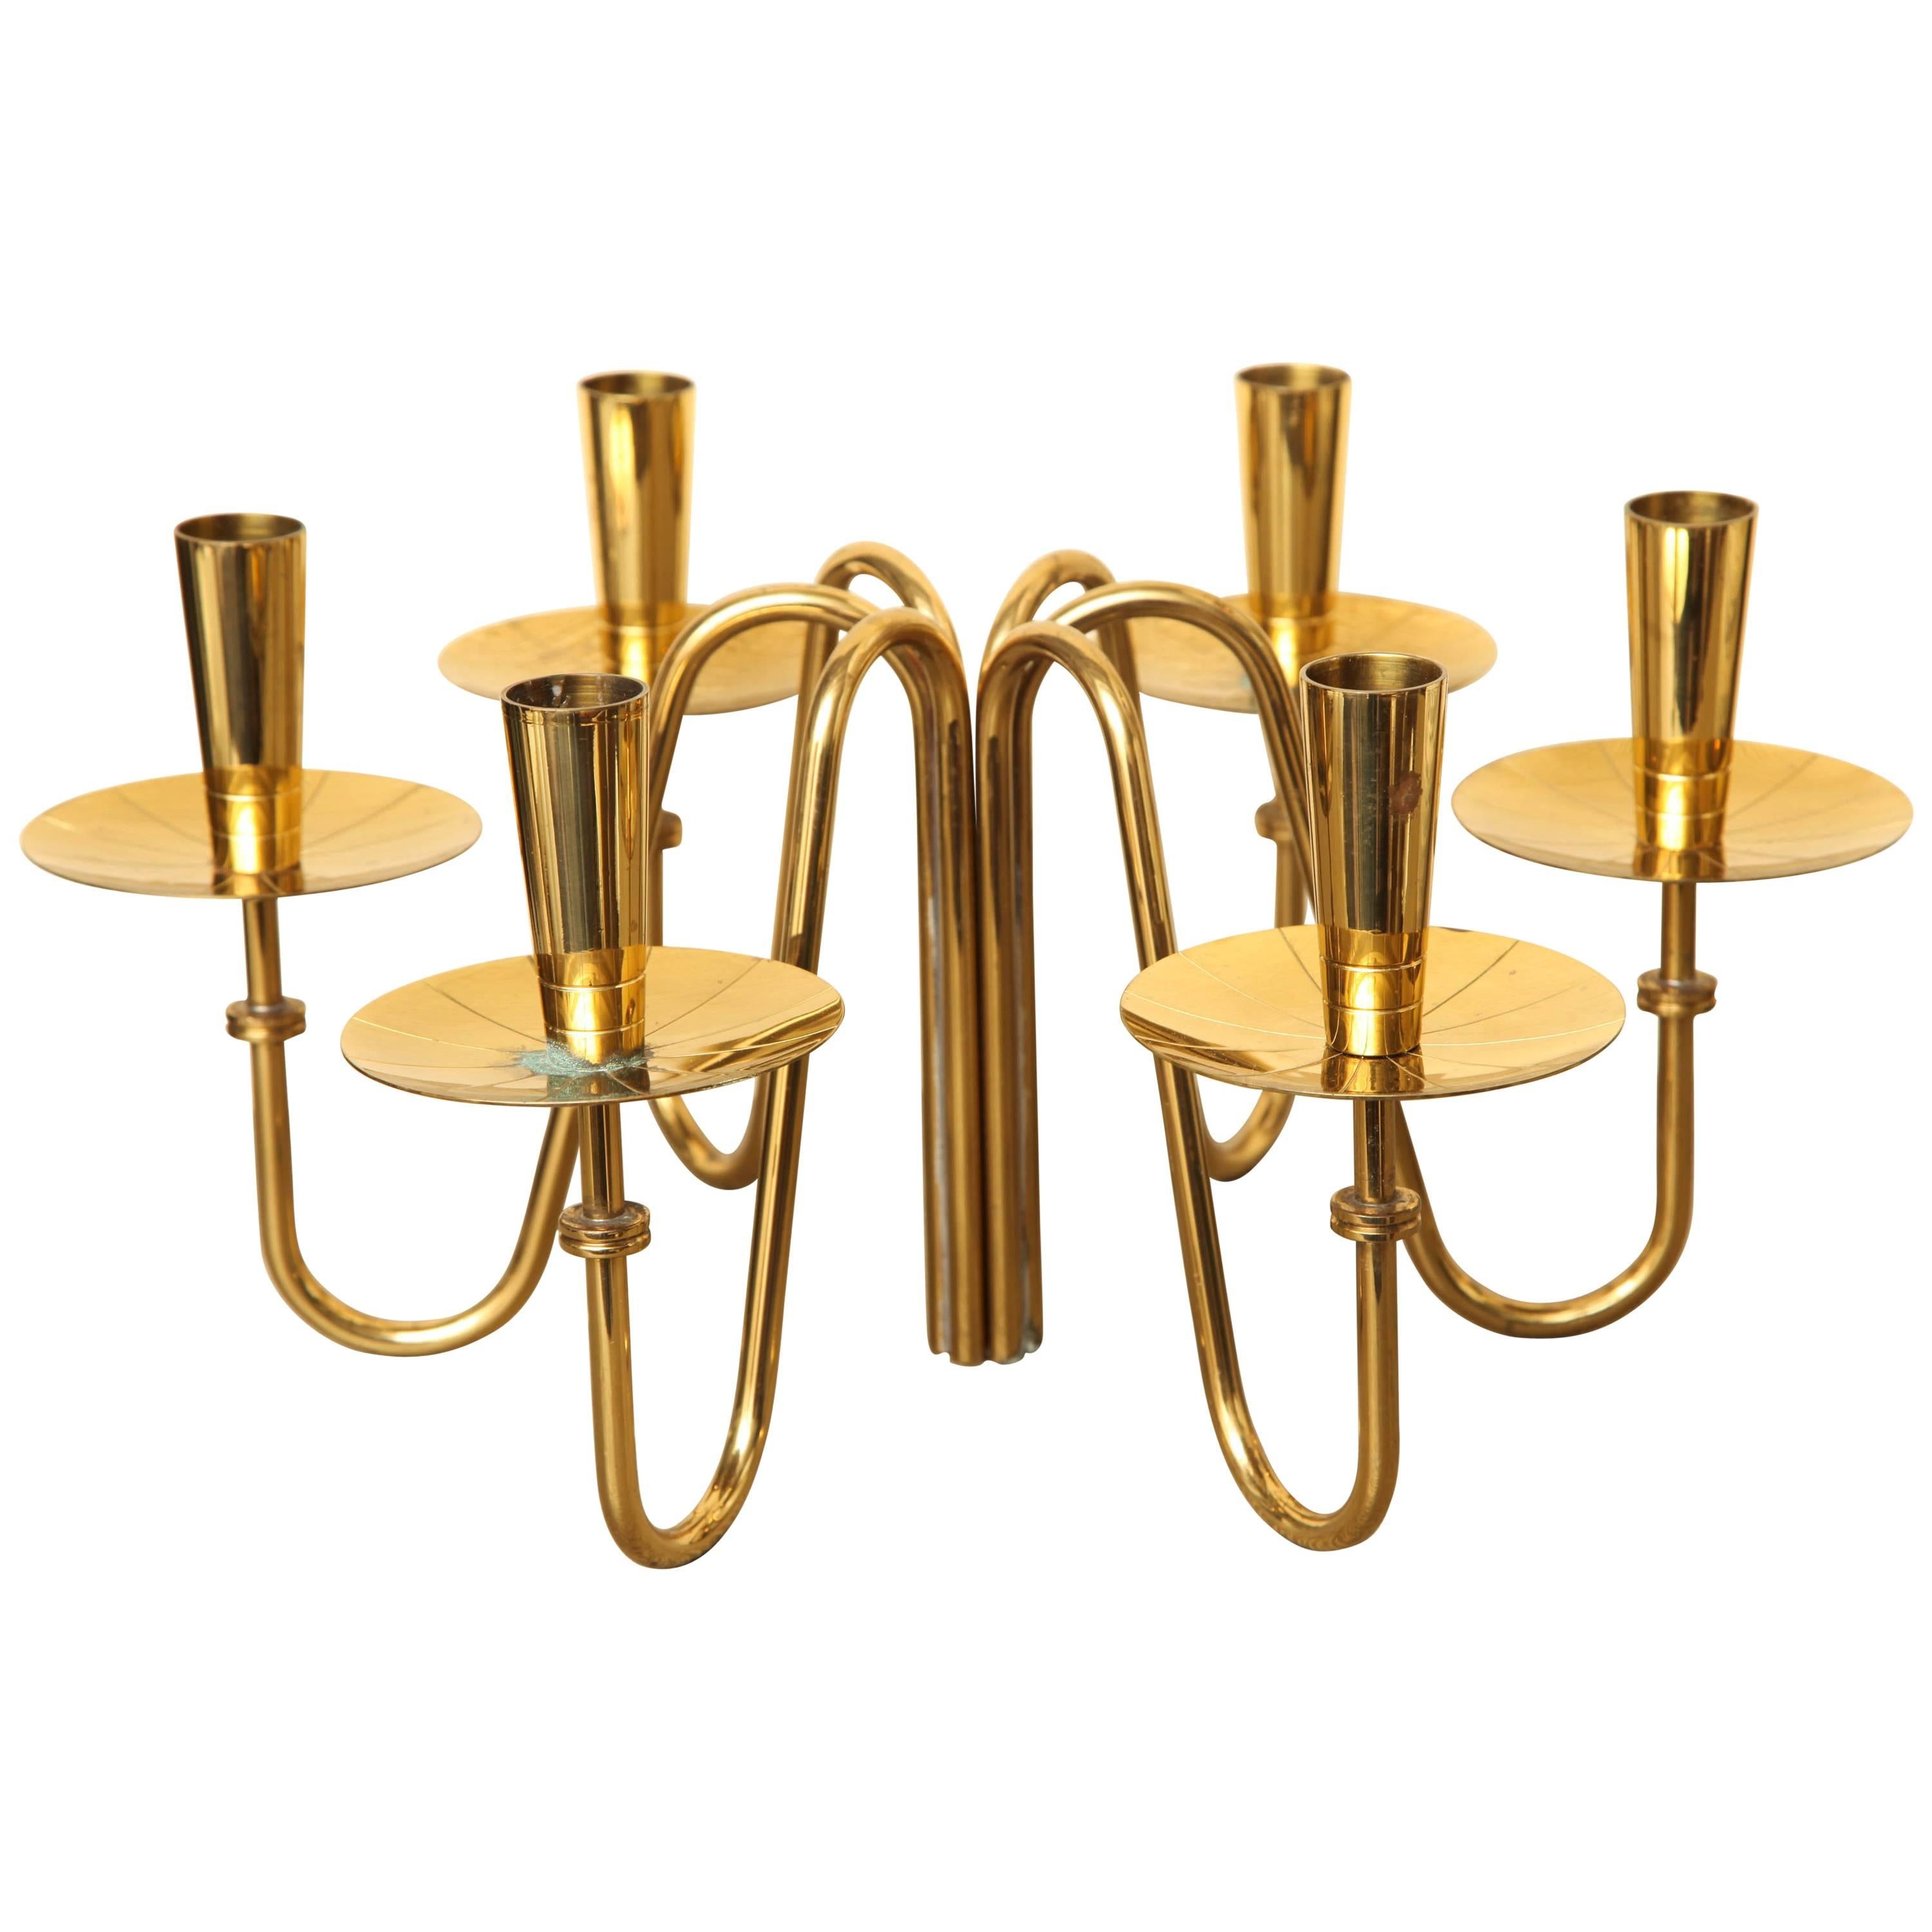 Pair of Brass Candle Holders by Tommi Parzinger, circa 1960 For Sale